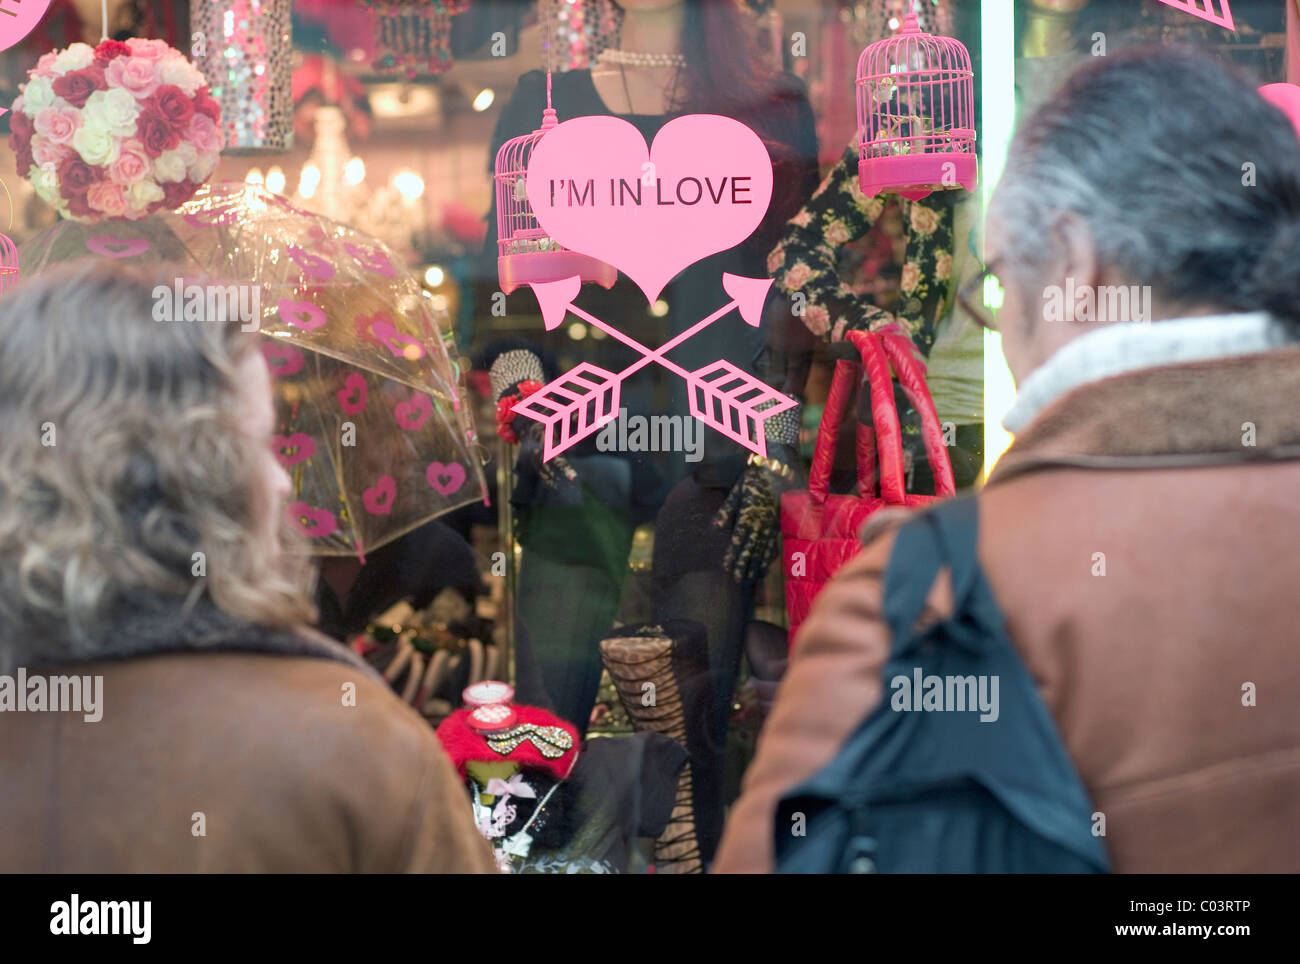 Couple looking into a store window with a pink heart sticker saying 'I'm in Love' Stock Photo